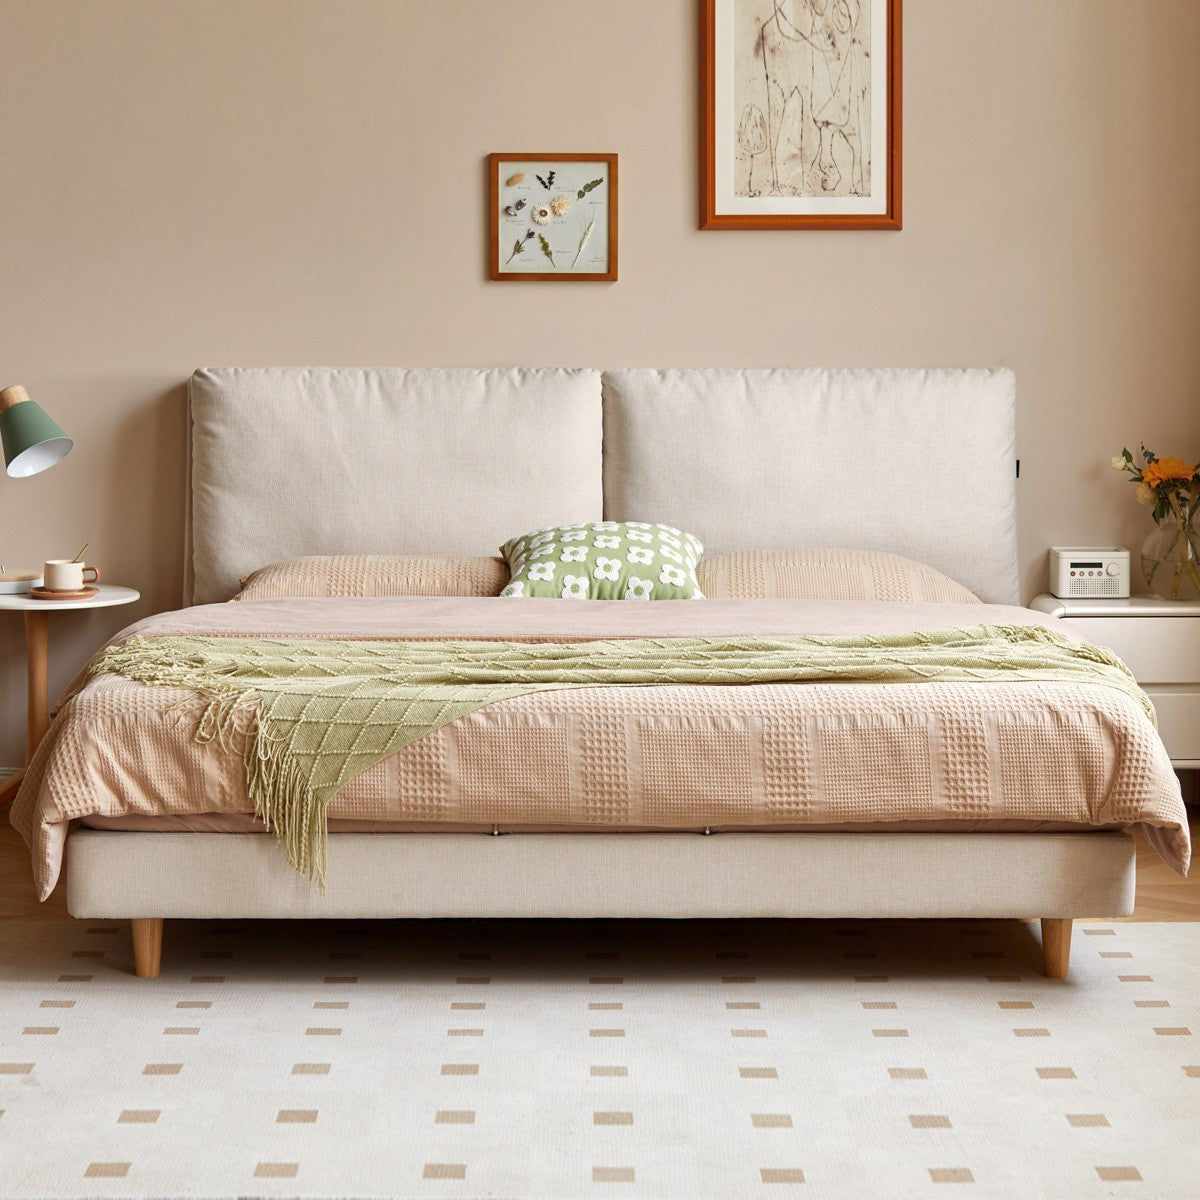 Imitation cotton and linen fabric Bed _)